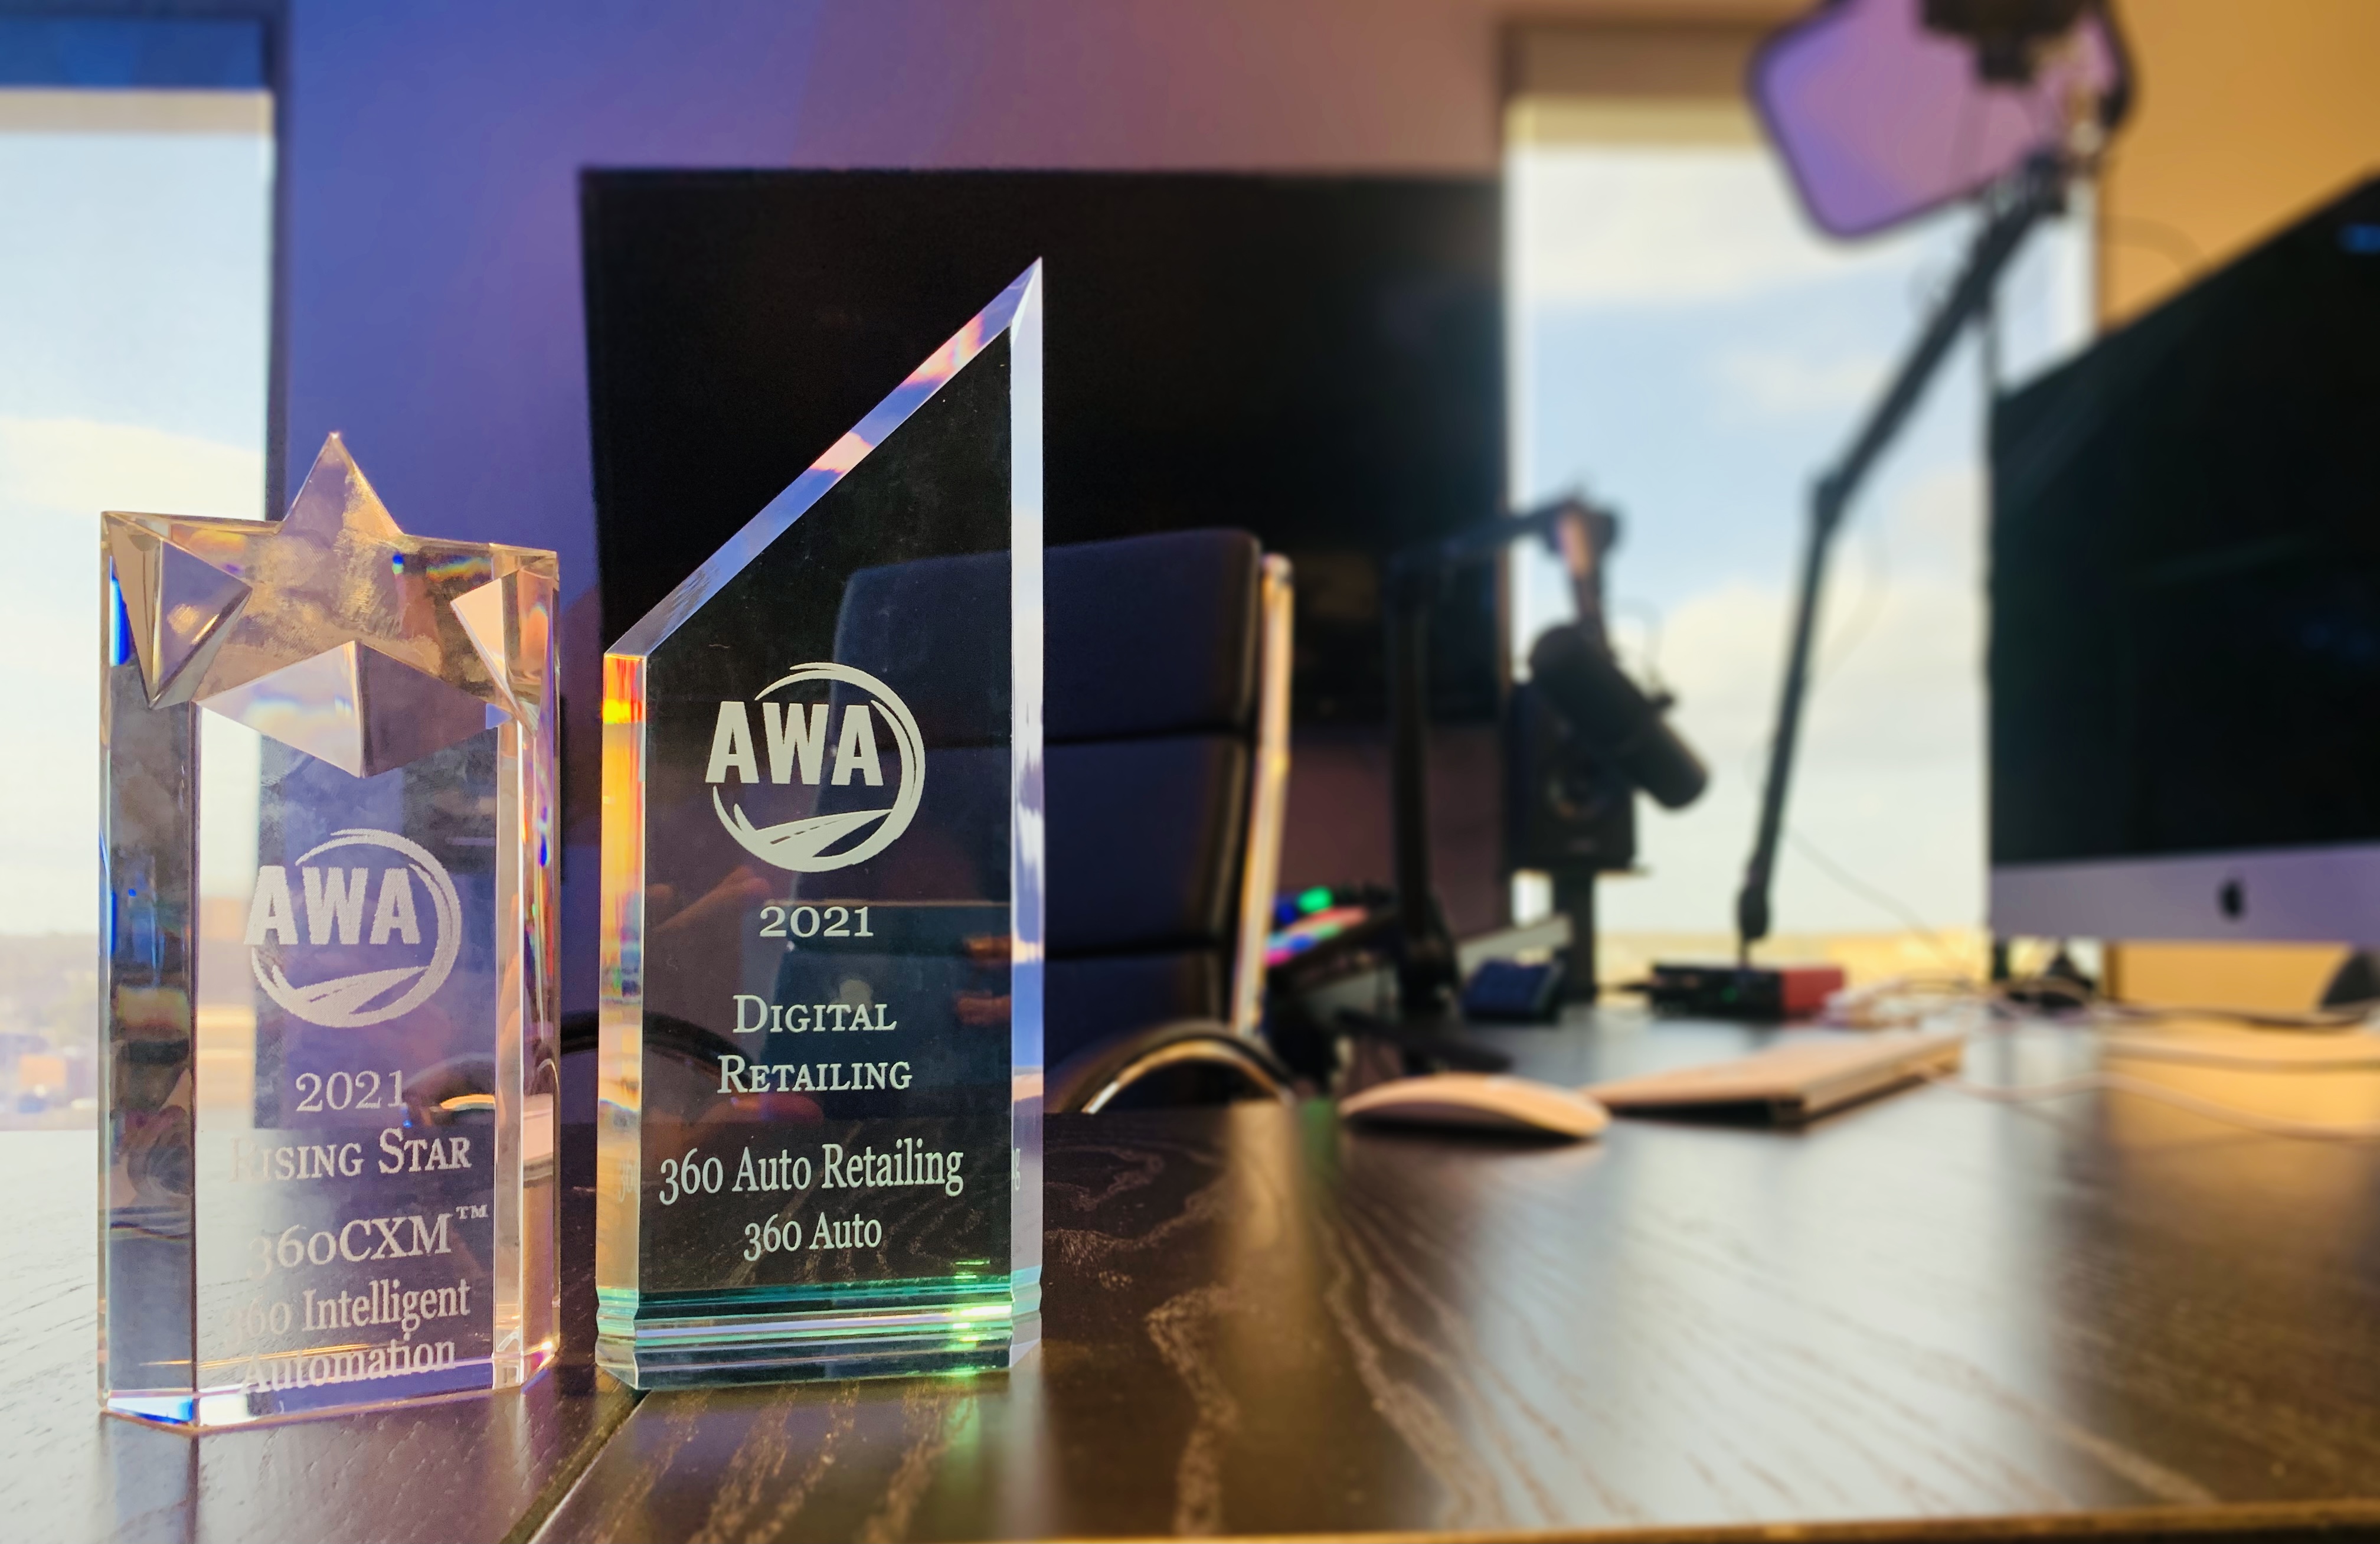 360 AUTO Wins 2 AWA 2021 Awards for Best in Class CXM and Digital Retailing Technology